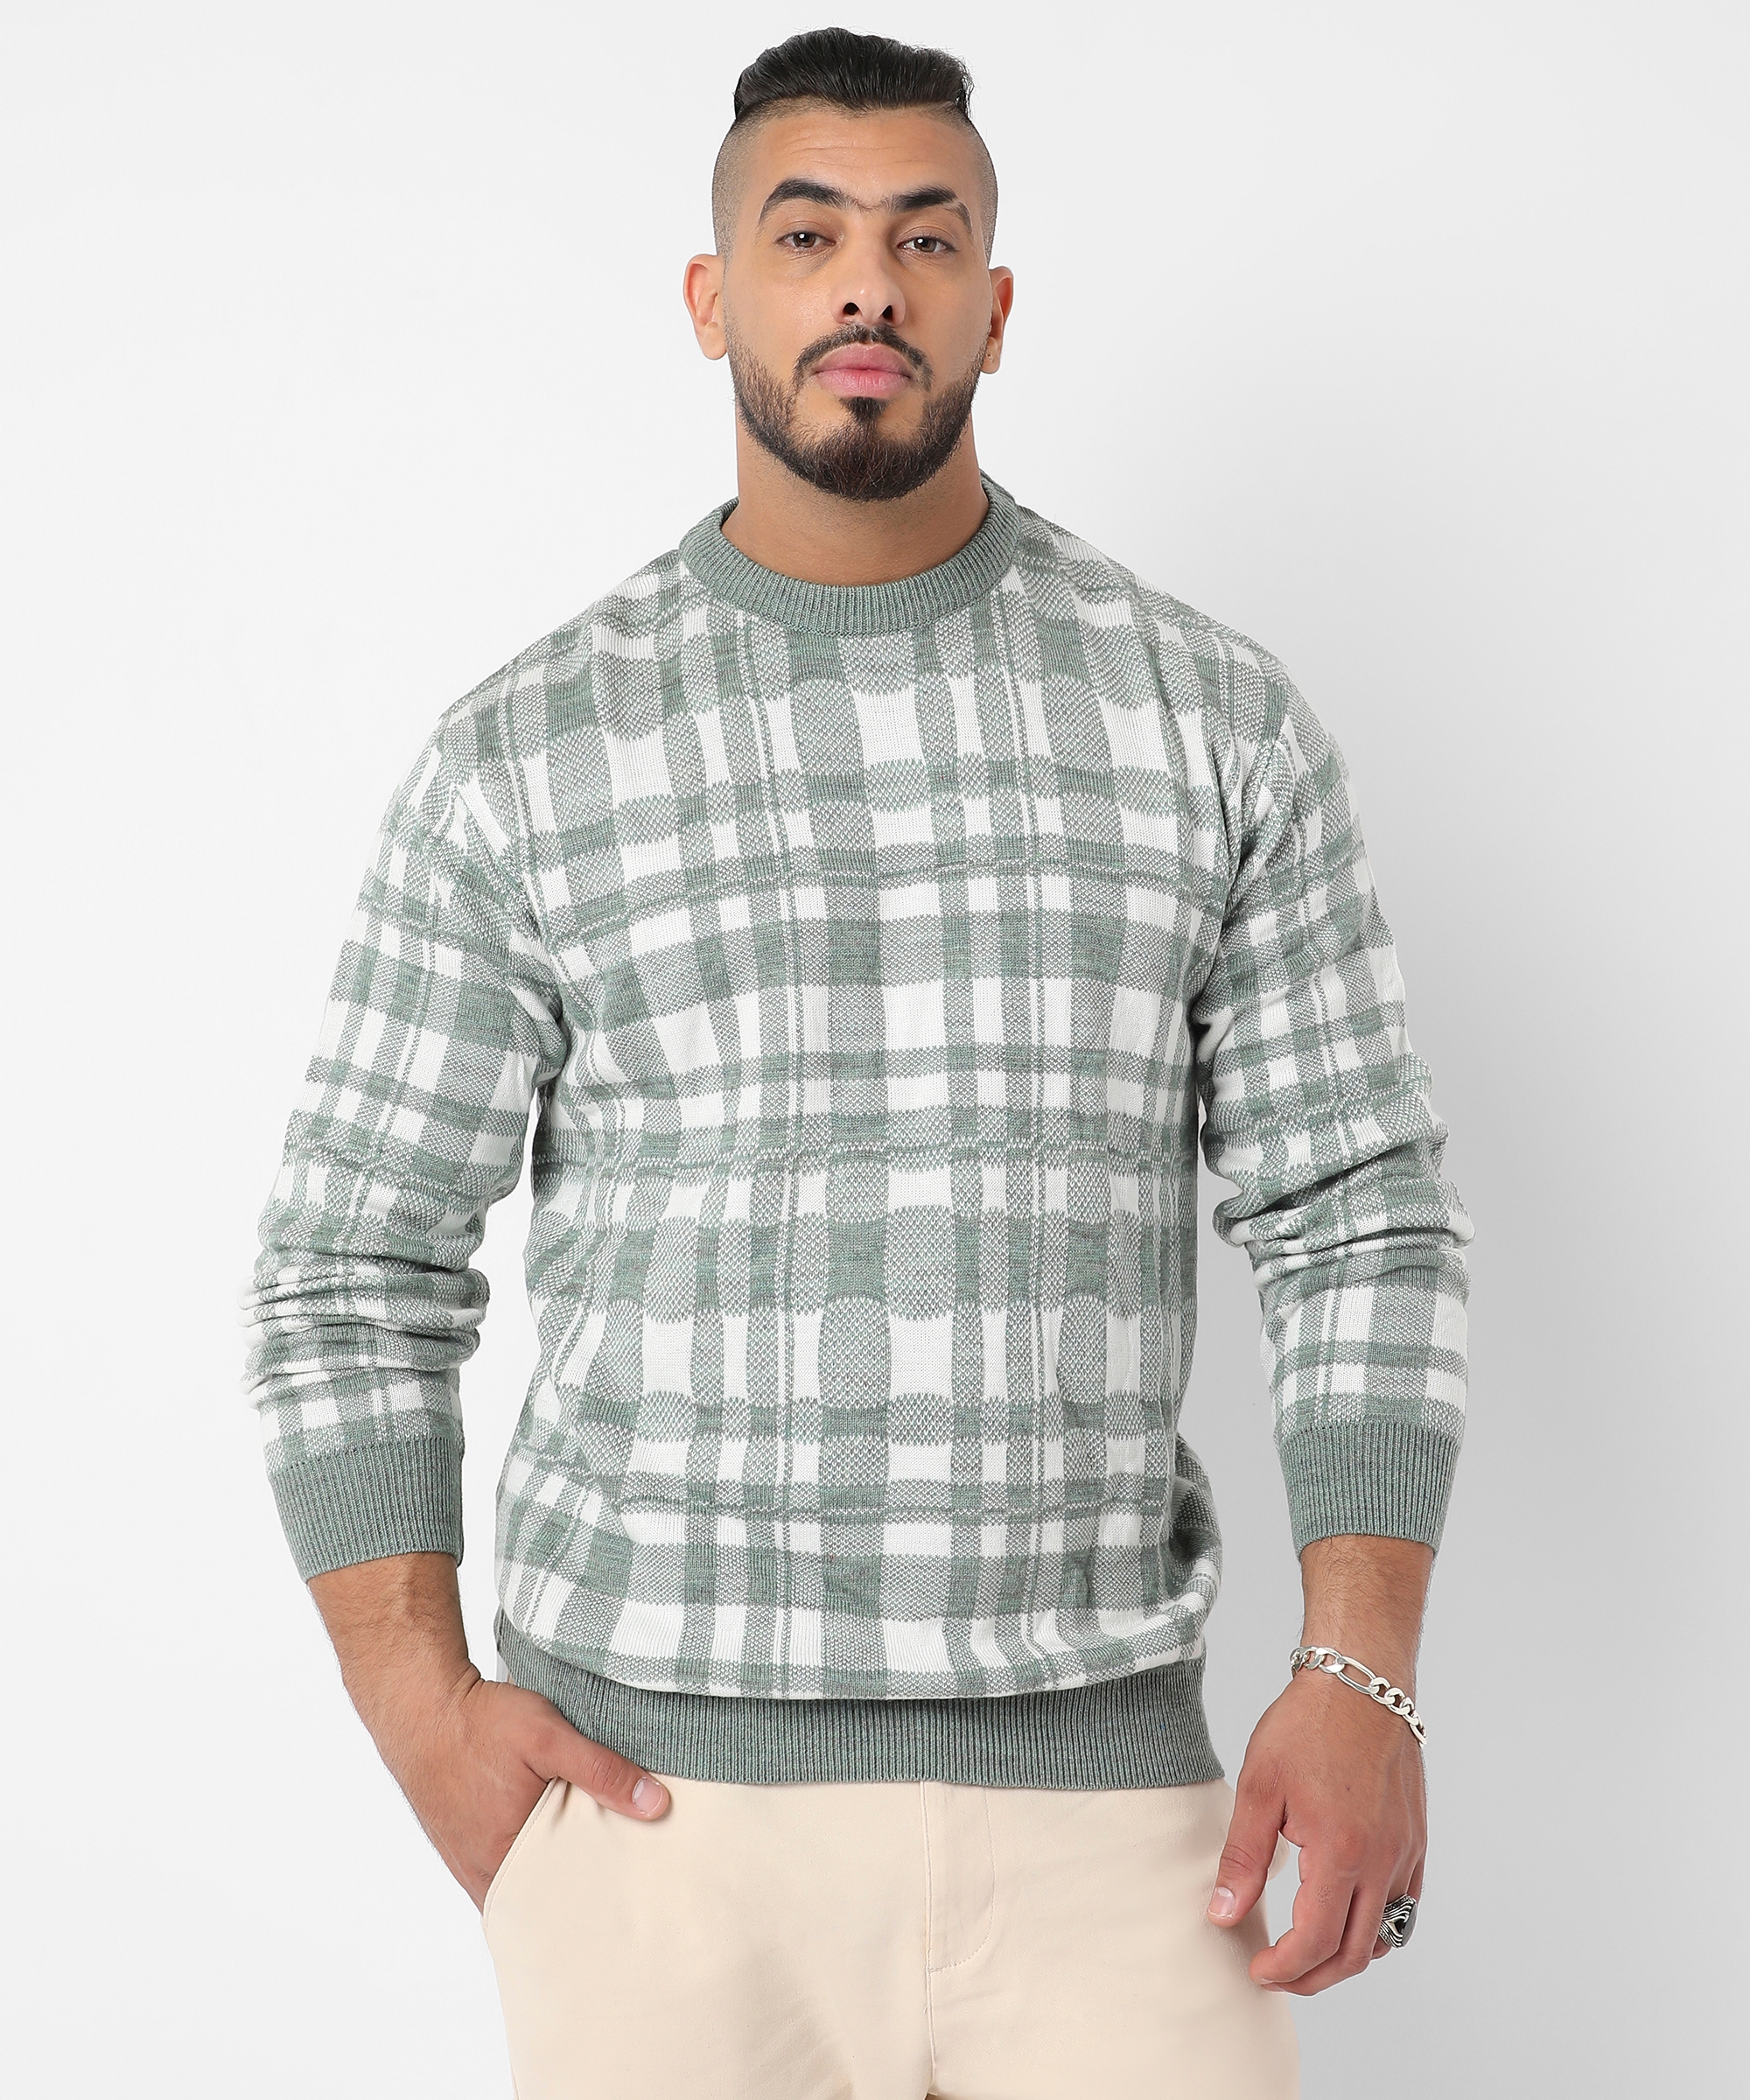 Instafab Plus | Men's Olive Green Tartan Plaid Knitted Pullover Sweater